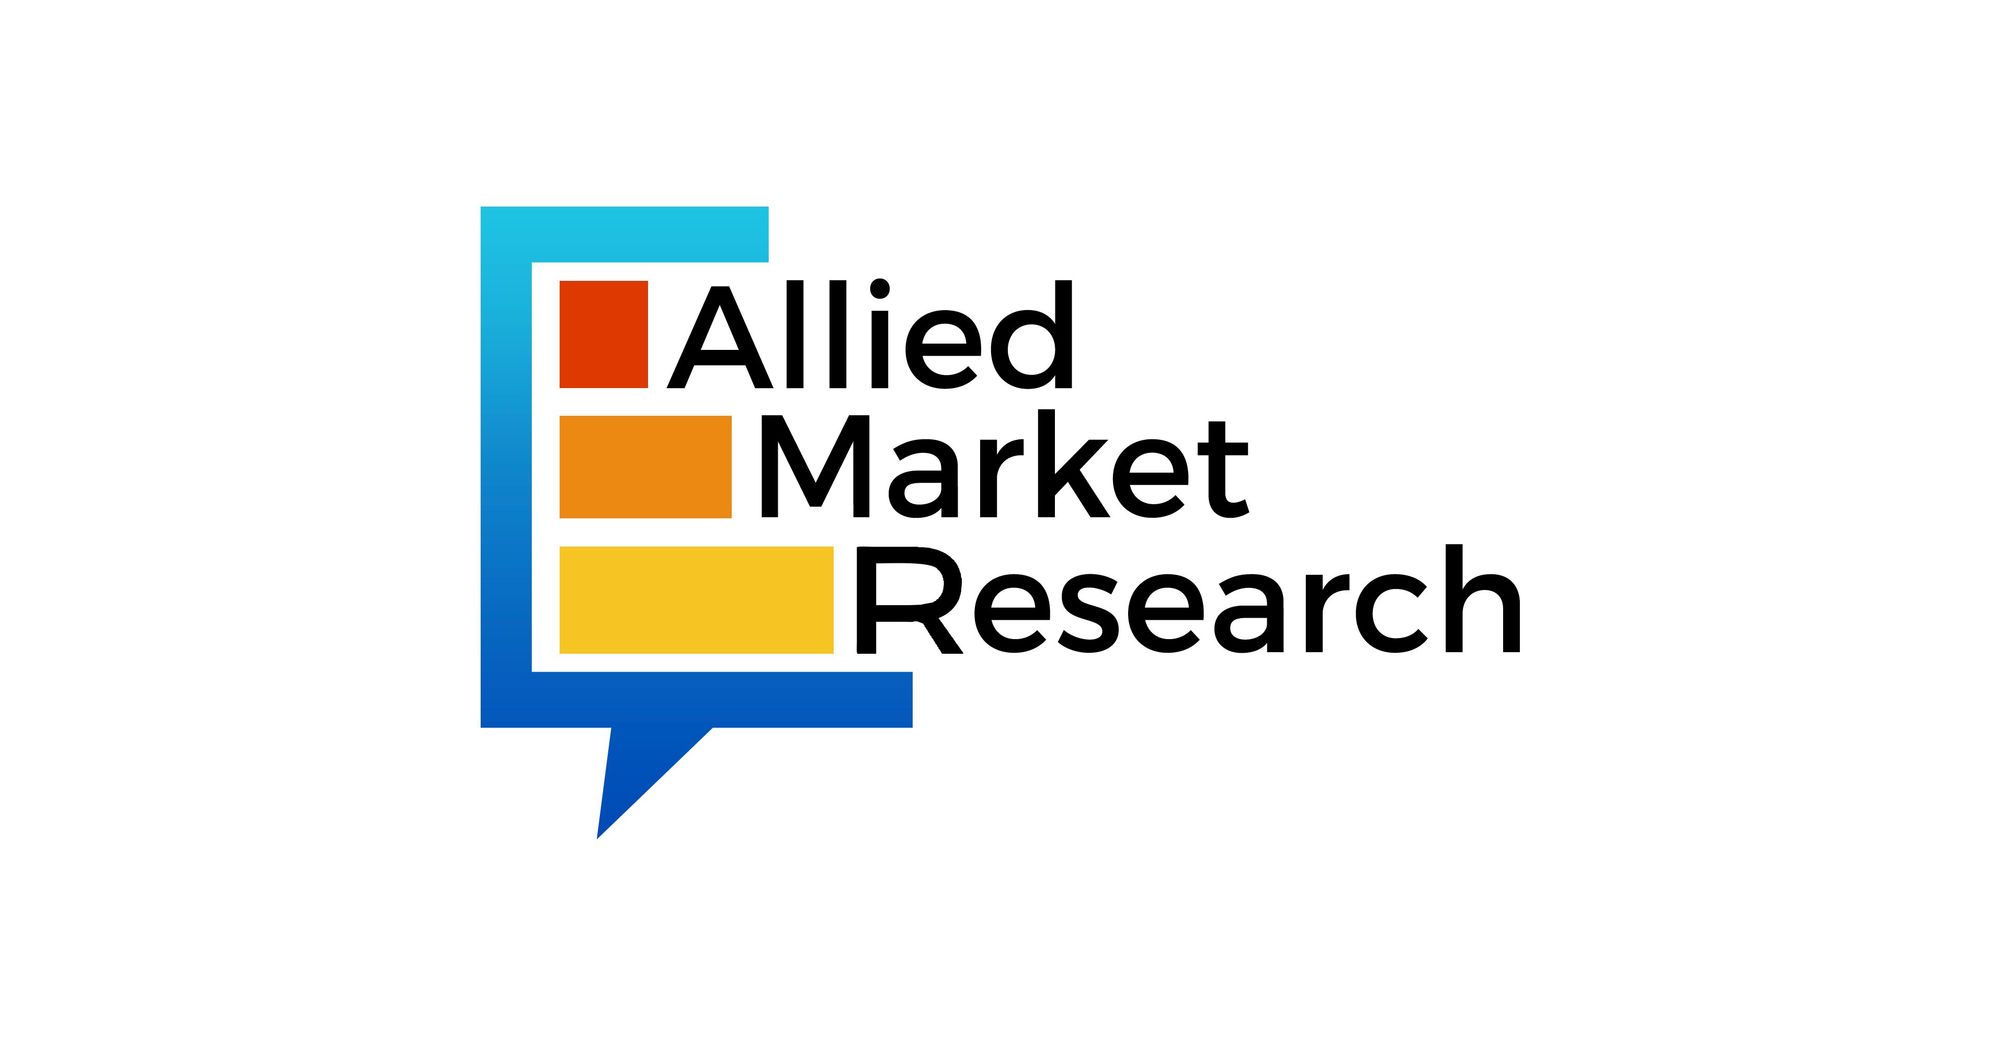 Self-Driving Electric Vehicle Market to Reach $5.0 Trillion, Globally, by 2031 at 36.3% CAGR: Allied Market Research